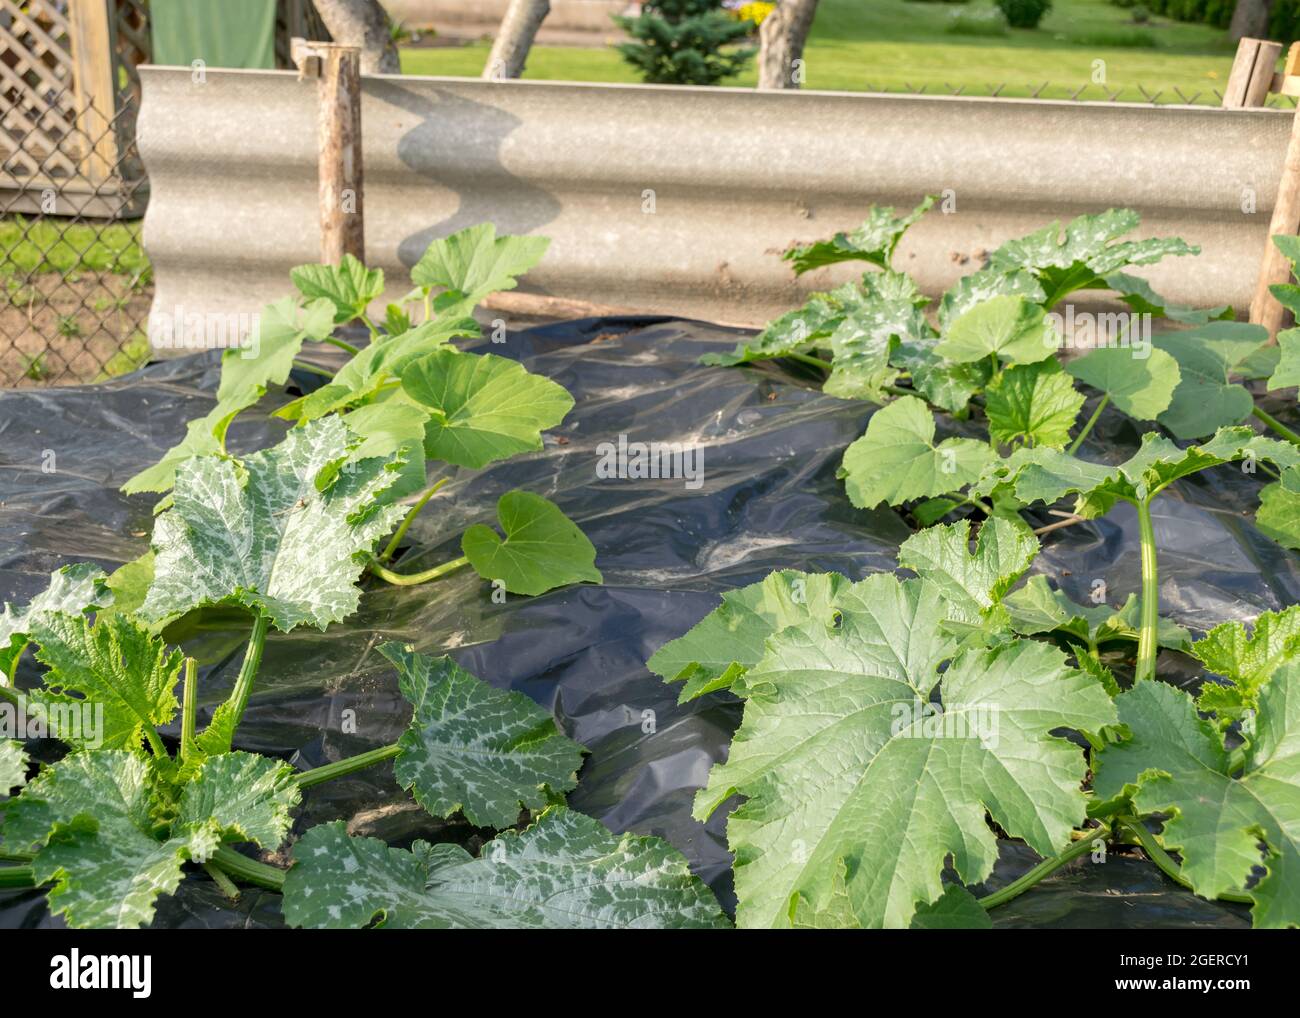 beautiful green courgette plants on a black film, gardening concept, growing vegetables, gardening as a hobby Stock Photo